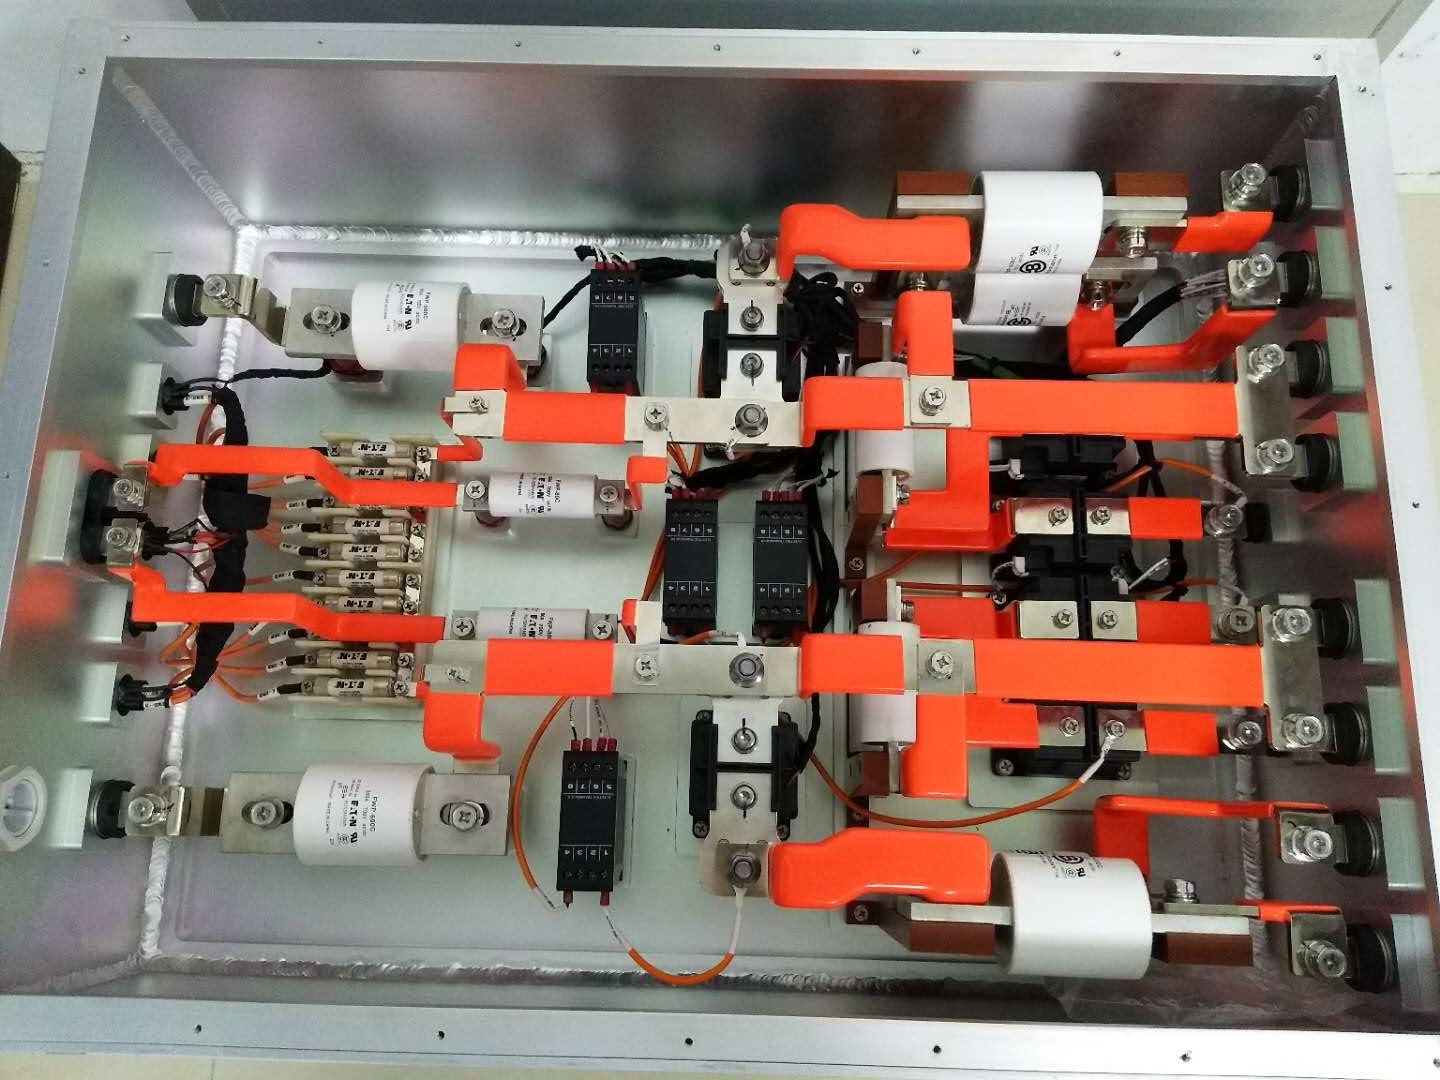 Battery pack control box